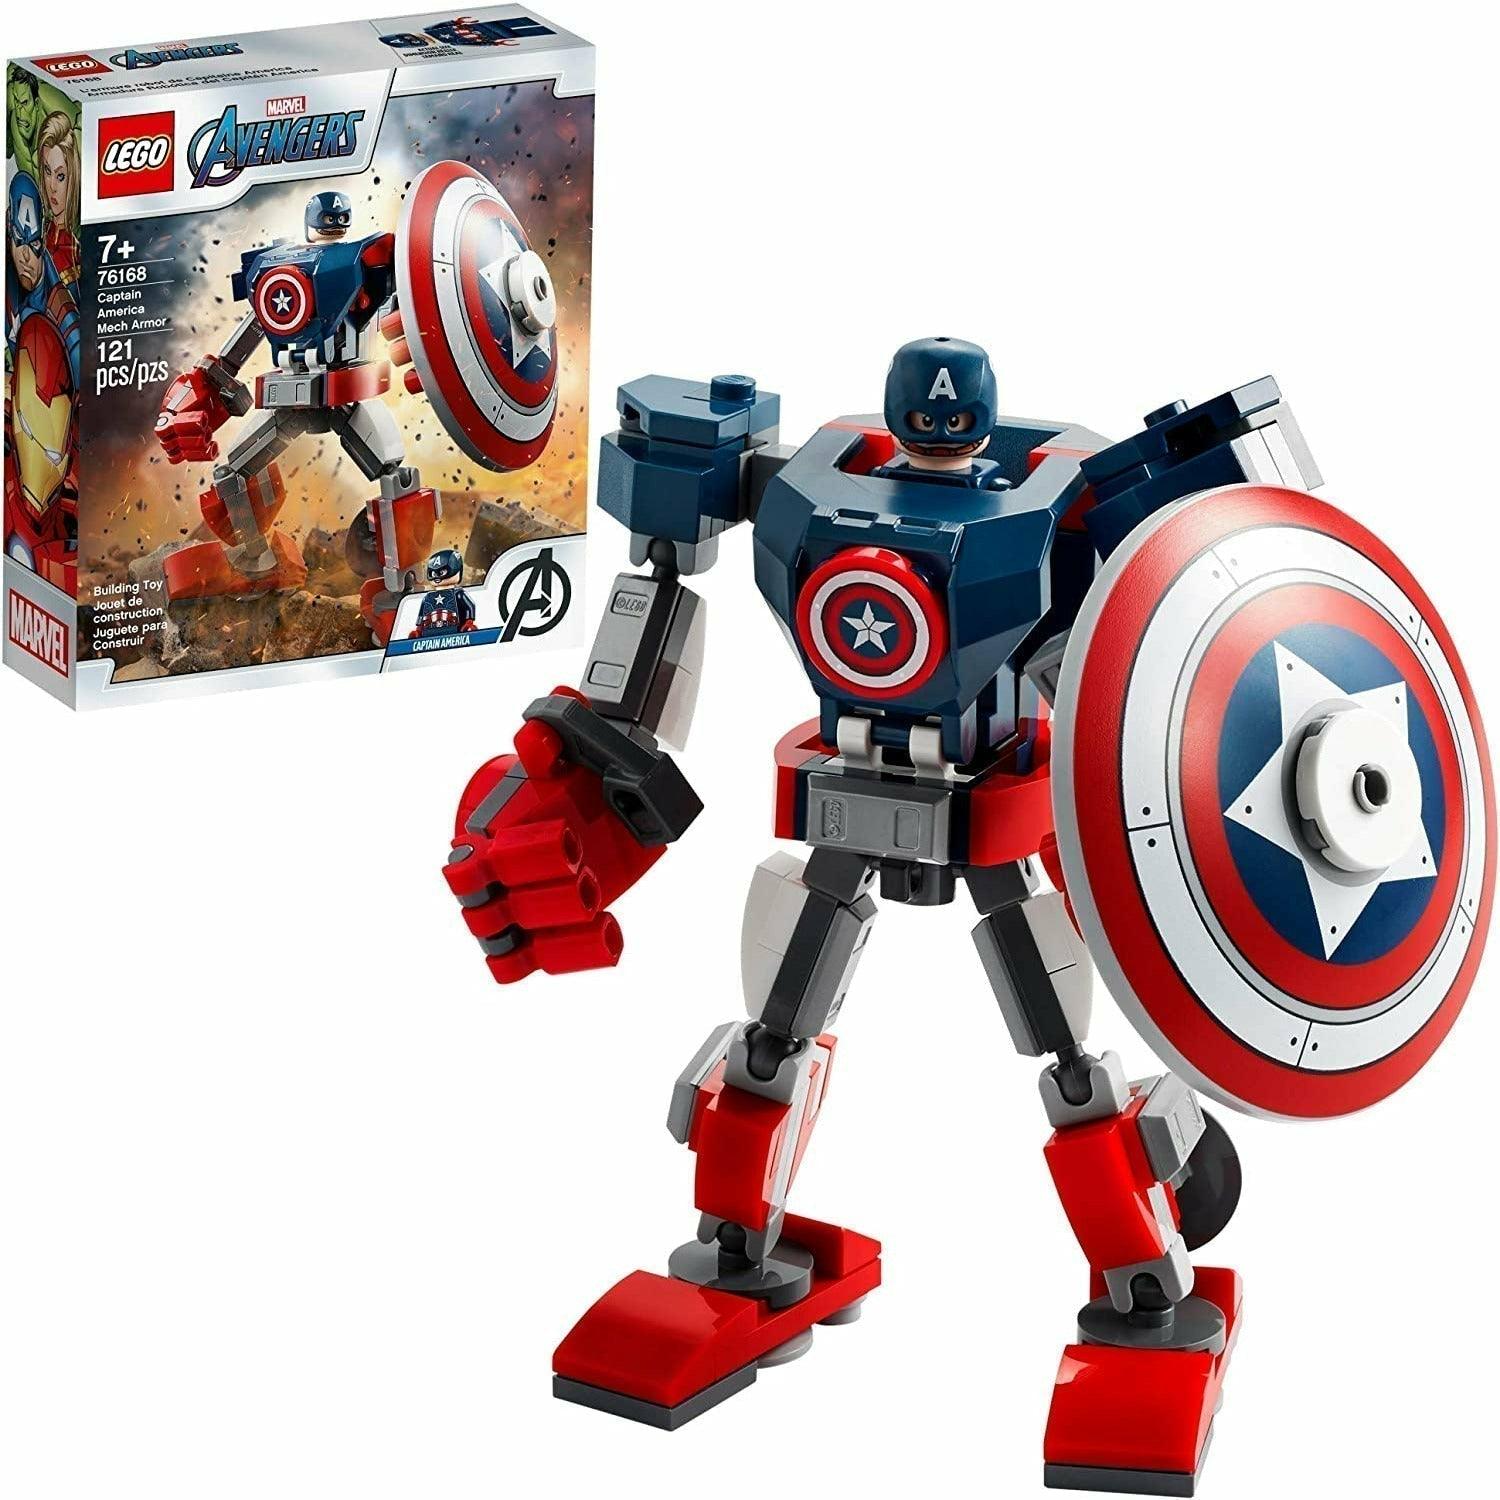 LEGO Marvel Avengers Classic Captain America Mech Armor 76168 Collectible Captain America Shield Building Toy, New 2021 (121 Pieces) - BumbleToys - 6+ Years, Action Figures, Avengers, Boys, Captain America, Figures, LEGO, Marvel, OXE, Pre-Order